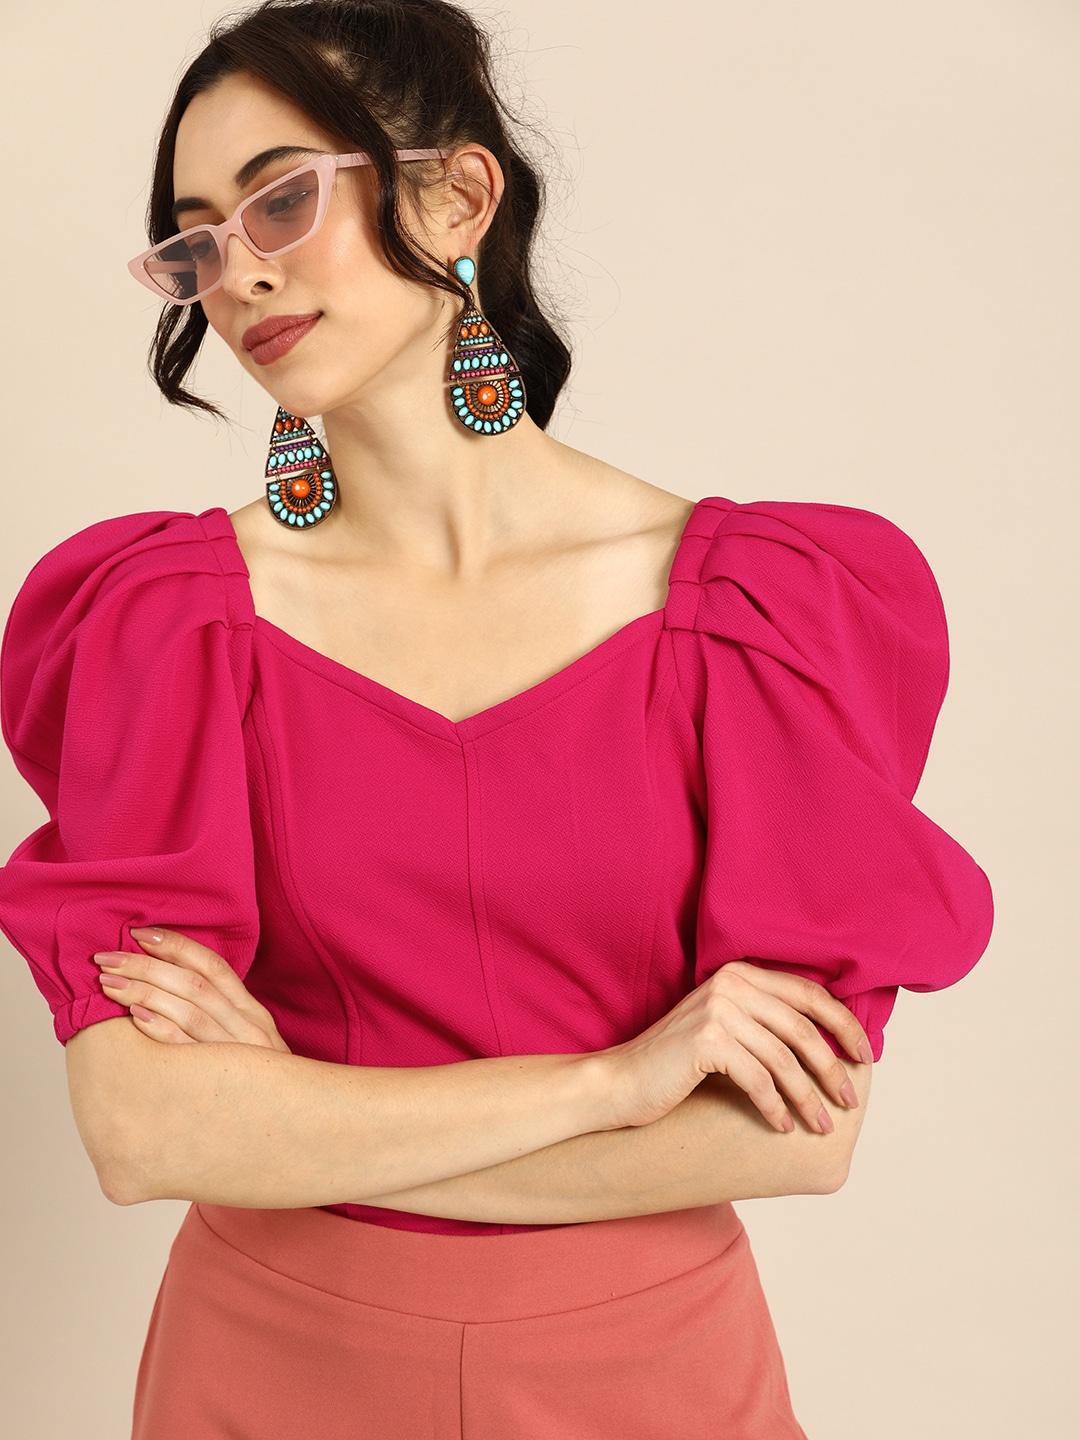 athena-chic-fuchsia-pink-power-shoulders-top